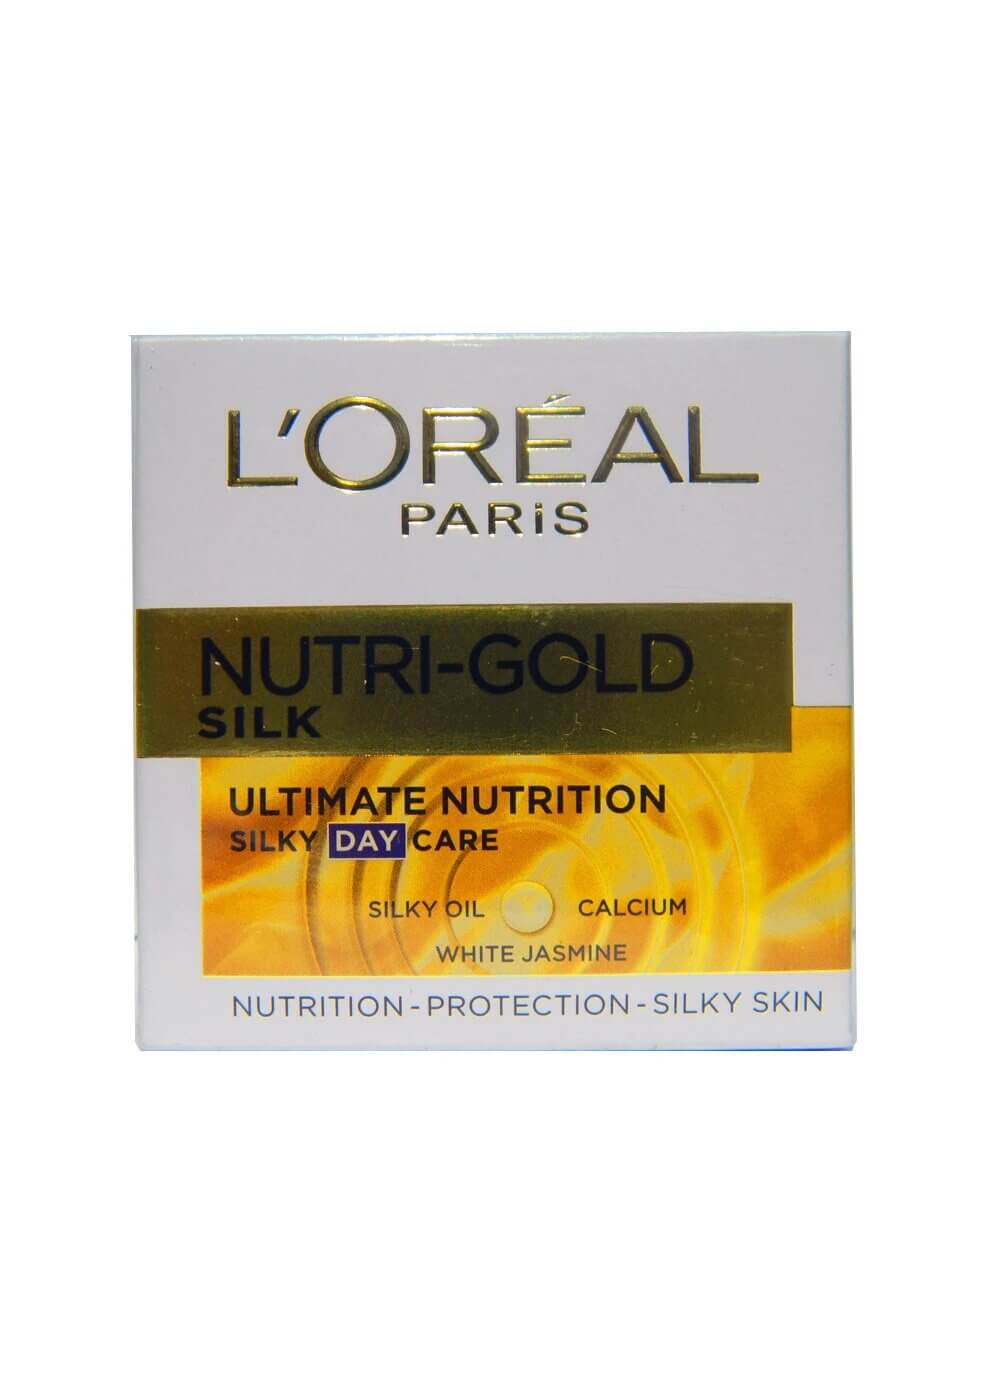 Loreal Nutri Gold Ultimate Nutrition Silky Day Care